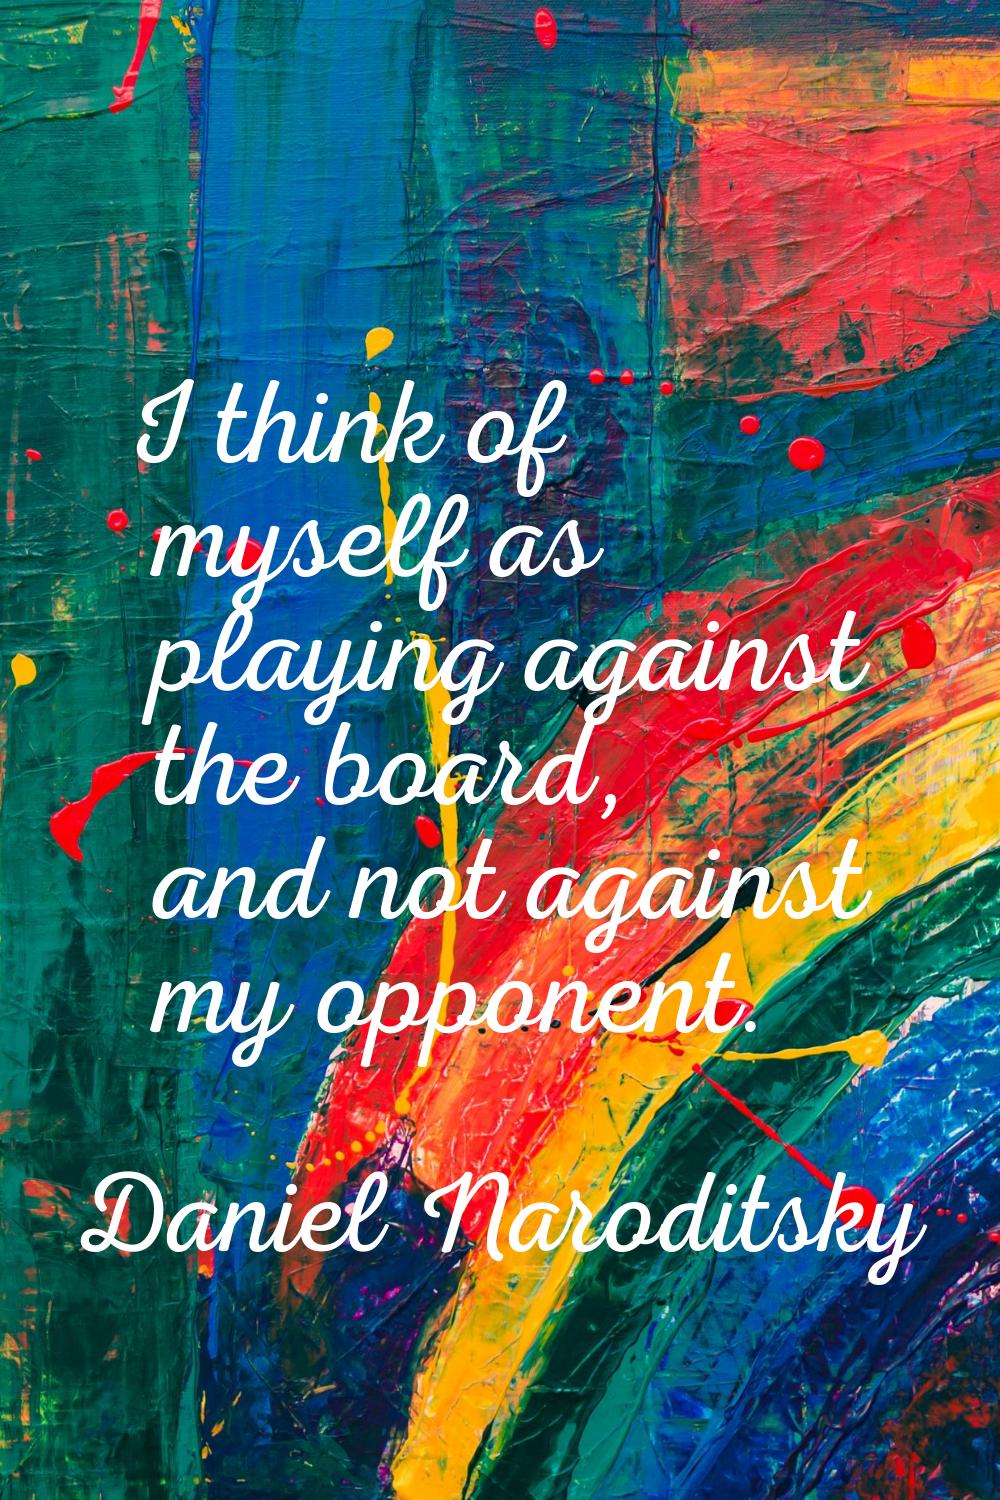 I think of myself as playing against the board, and not against my opponent.